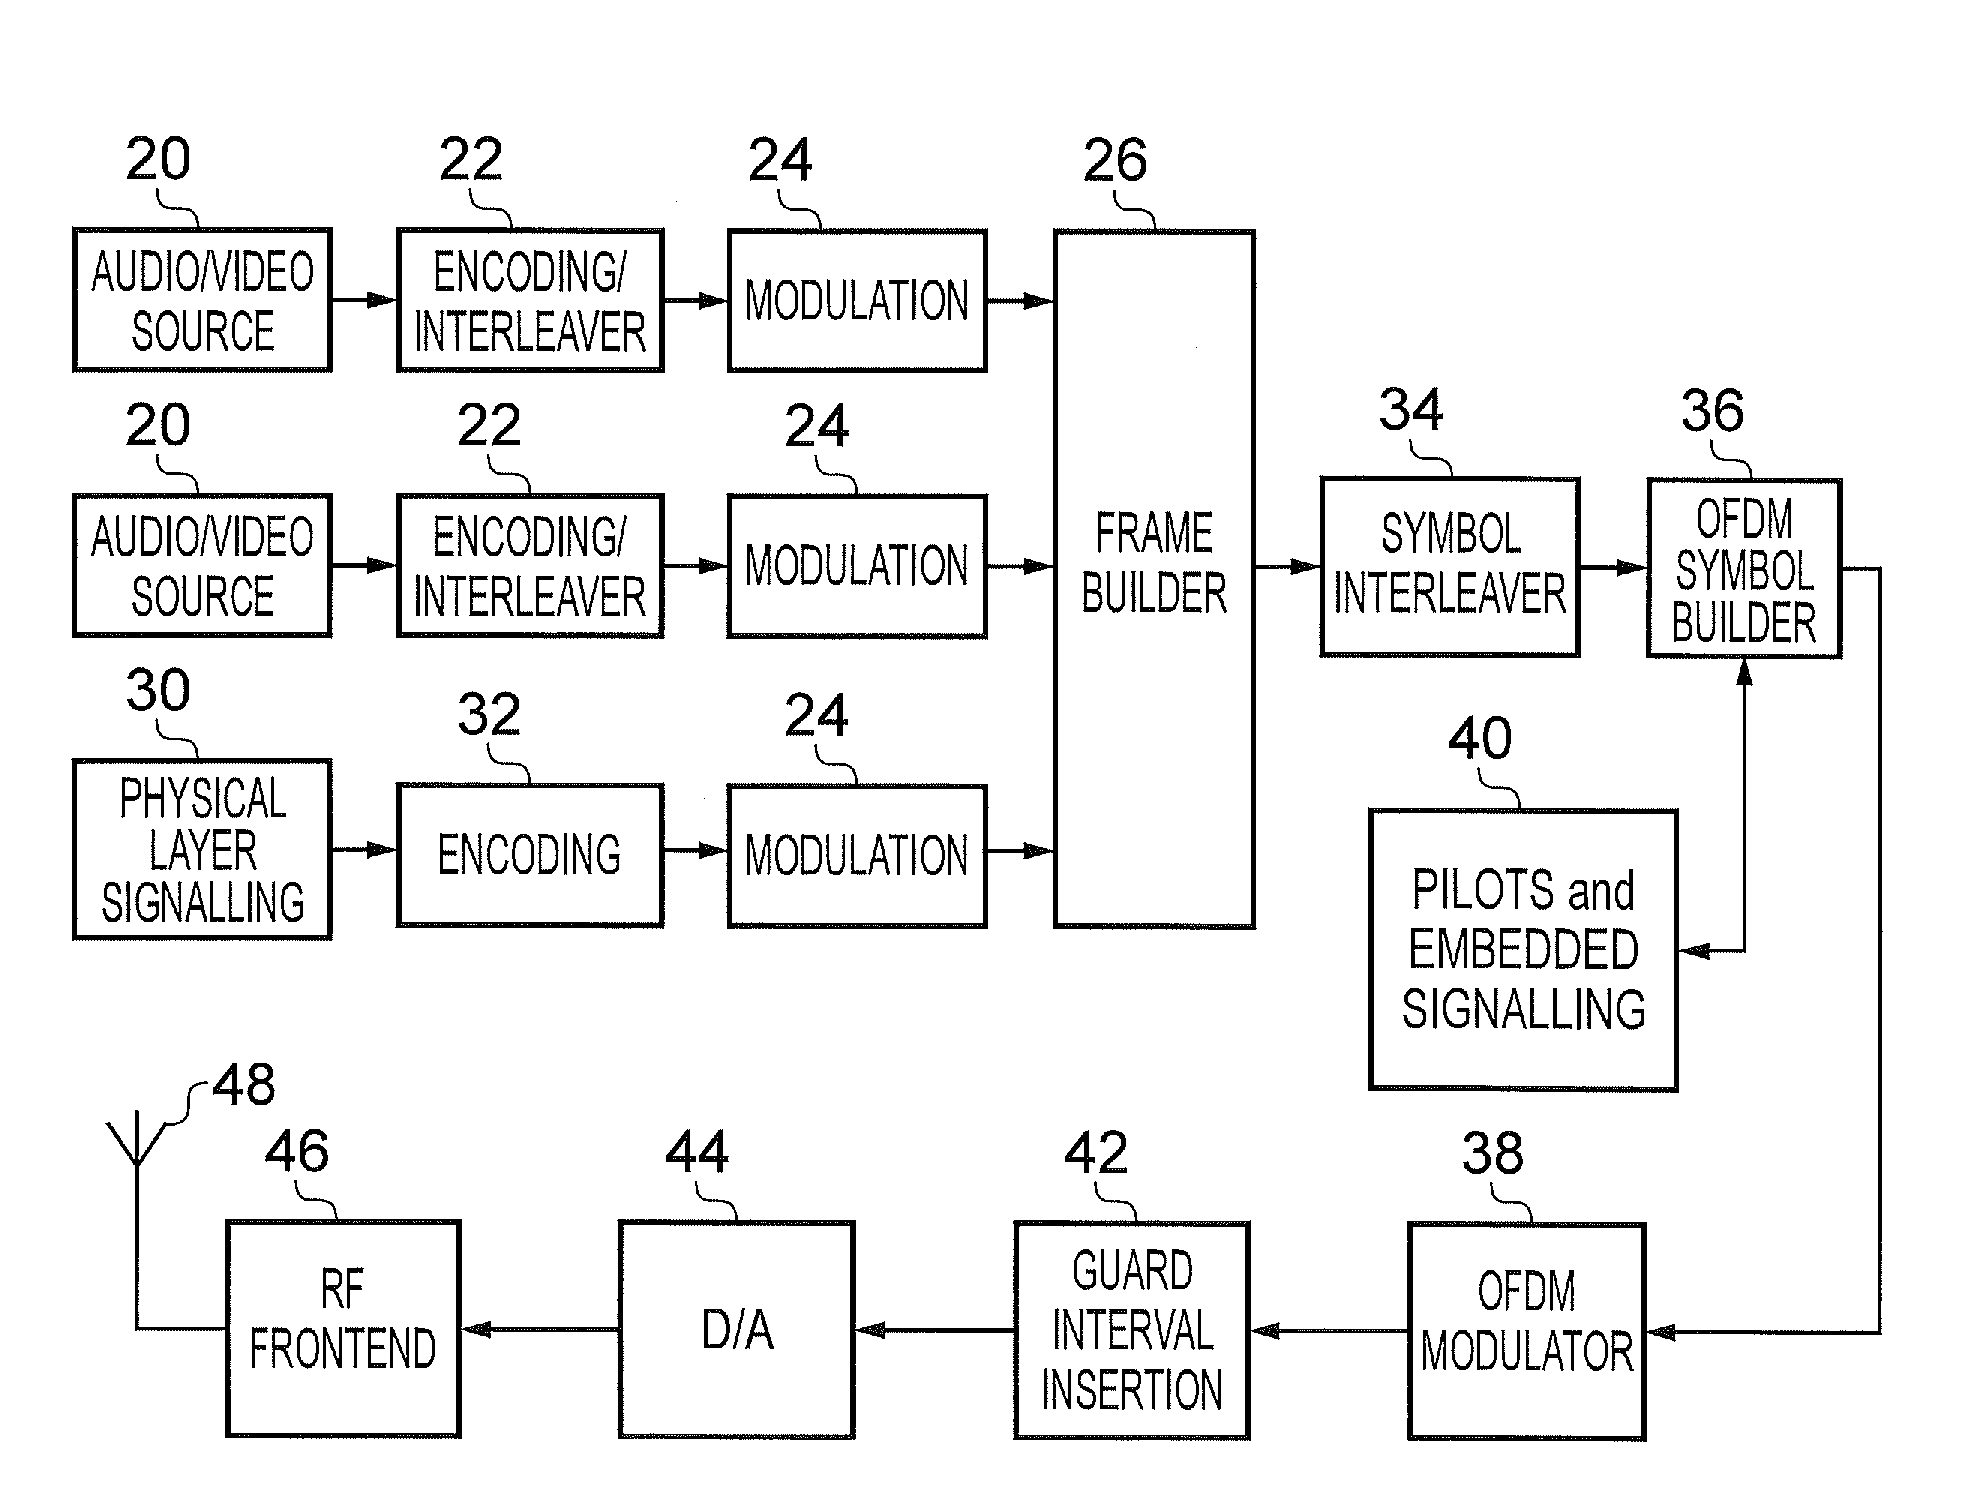 Transmitter and method of transmitting payload data, receiver and method of receiving payload data in an OFDM system